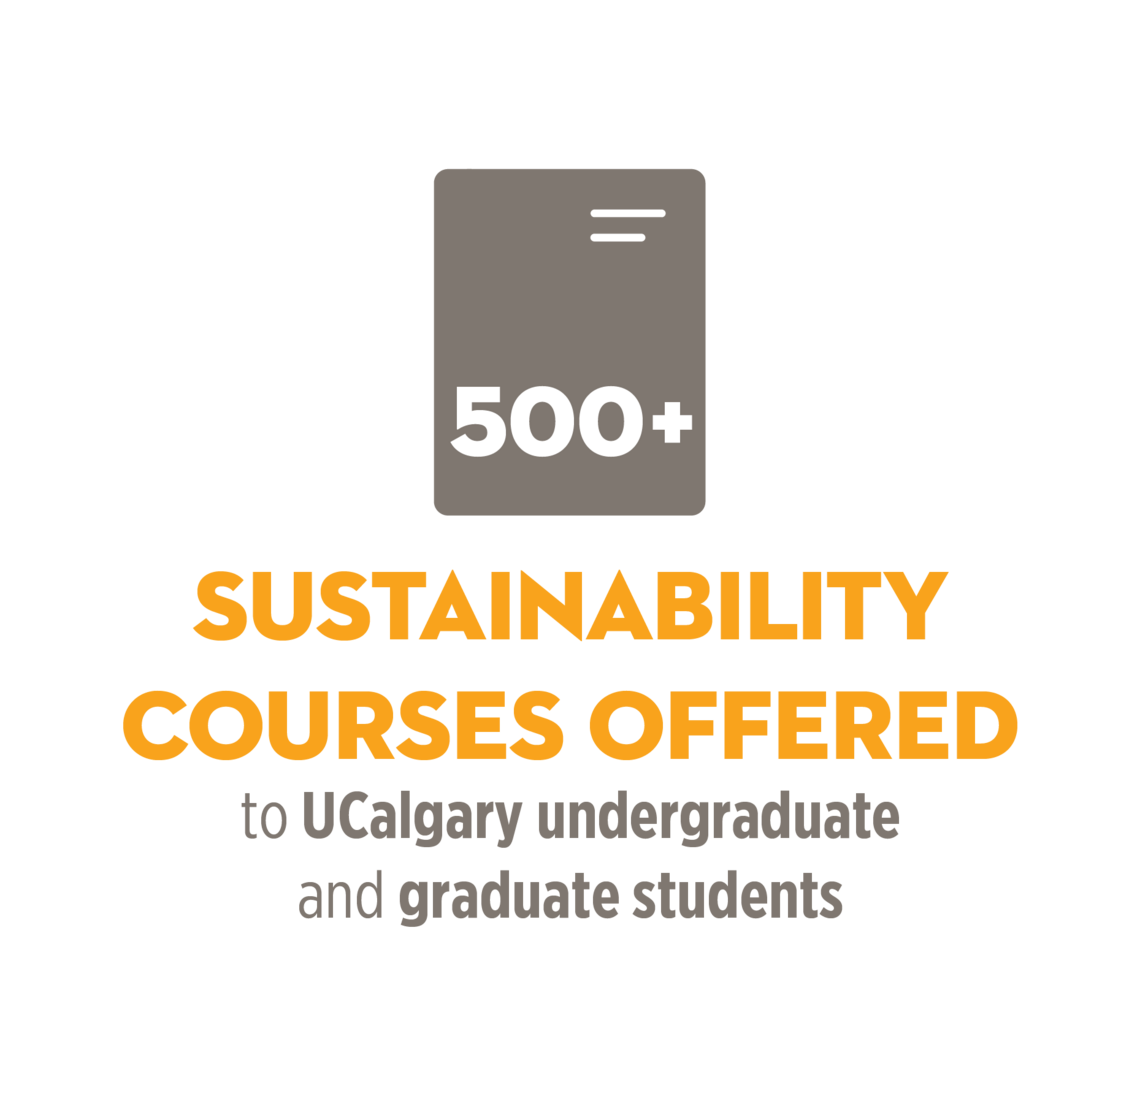 500+ Sustainability Courses offered to undergraduate and graduate students